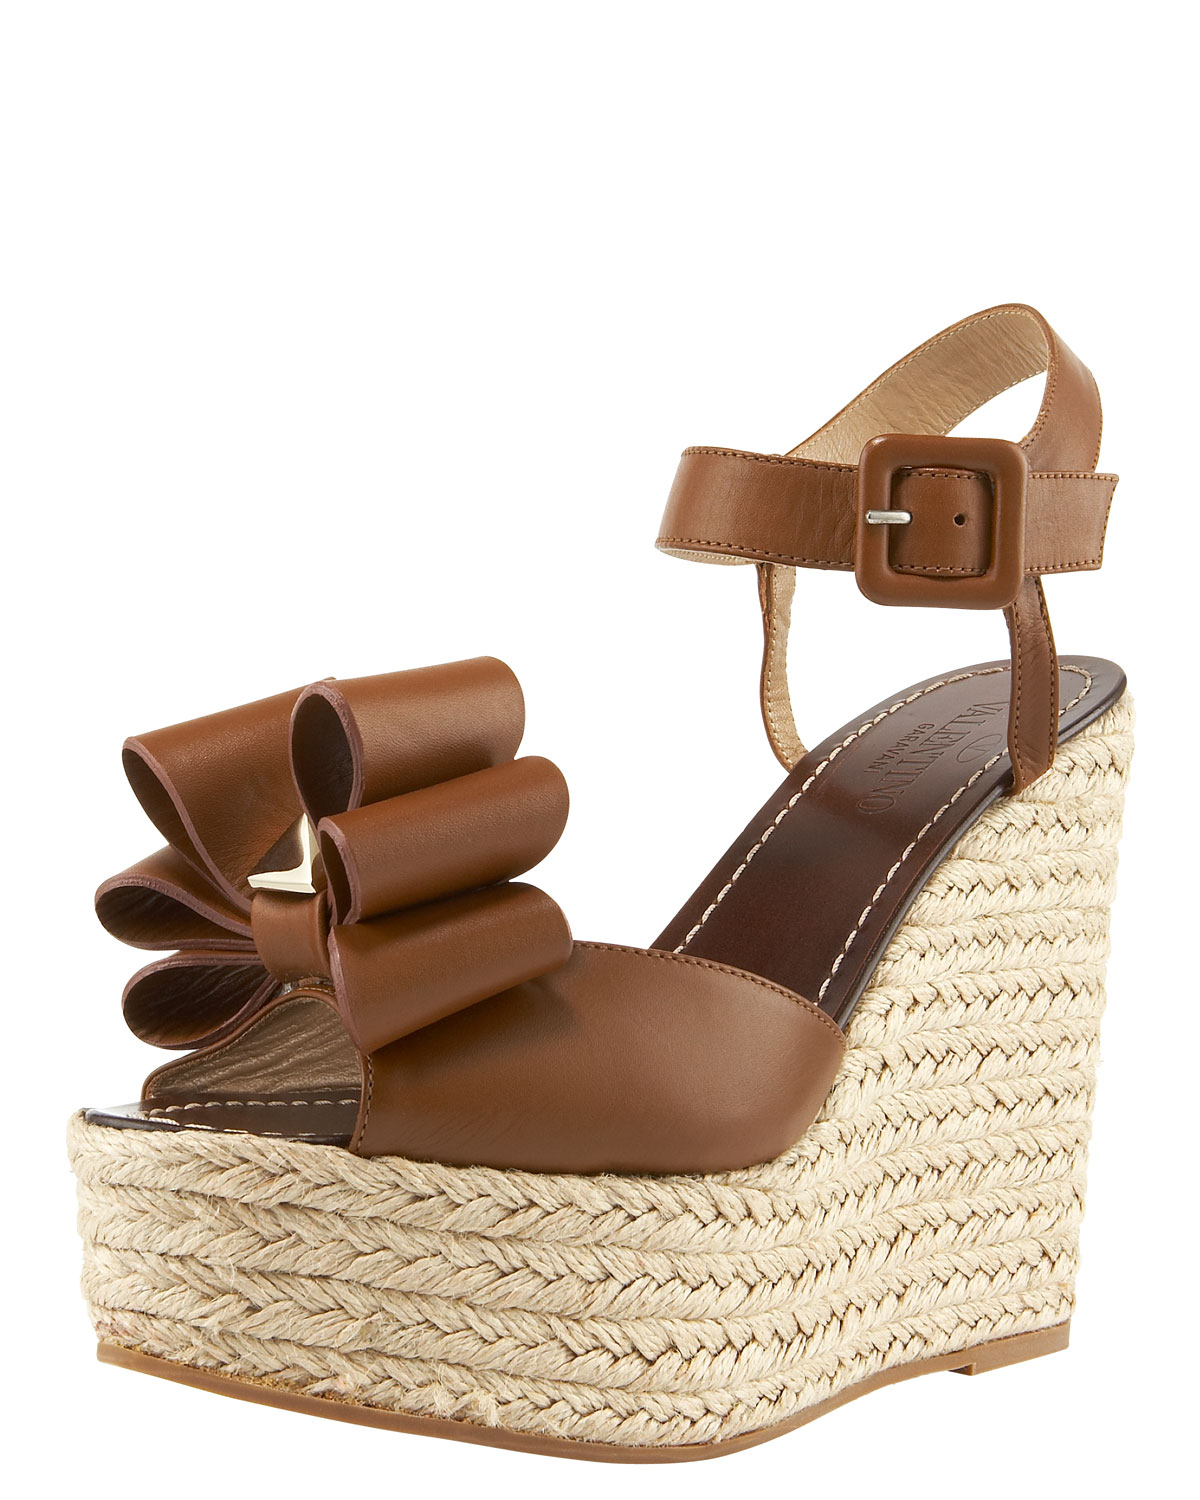 Lyst - Valentino Stud-bow Wedge Espadrille in Brown